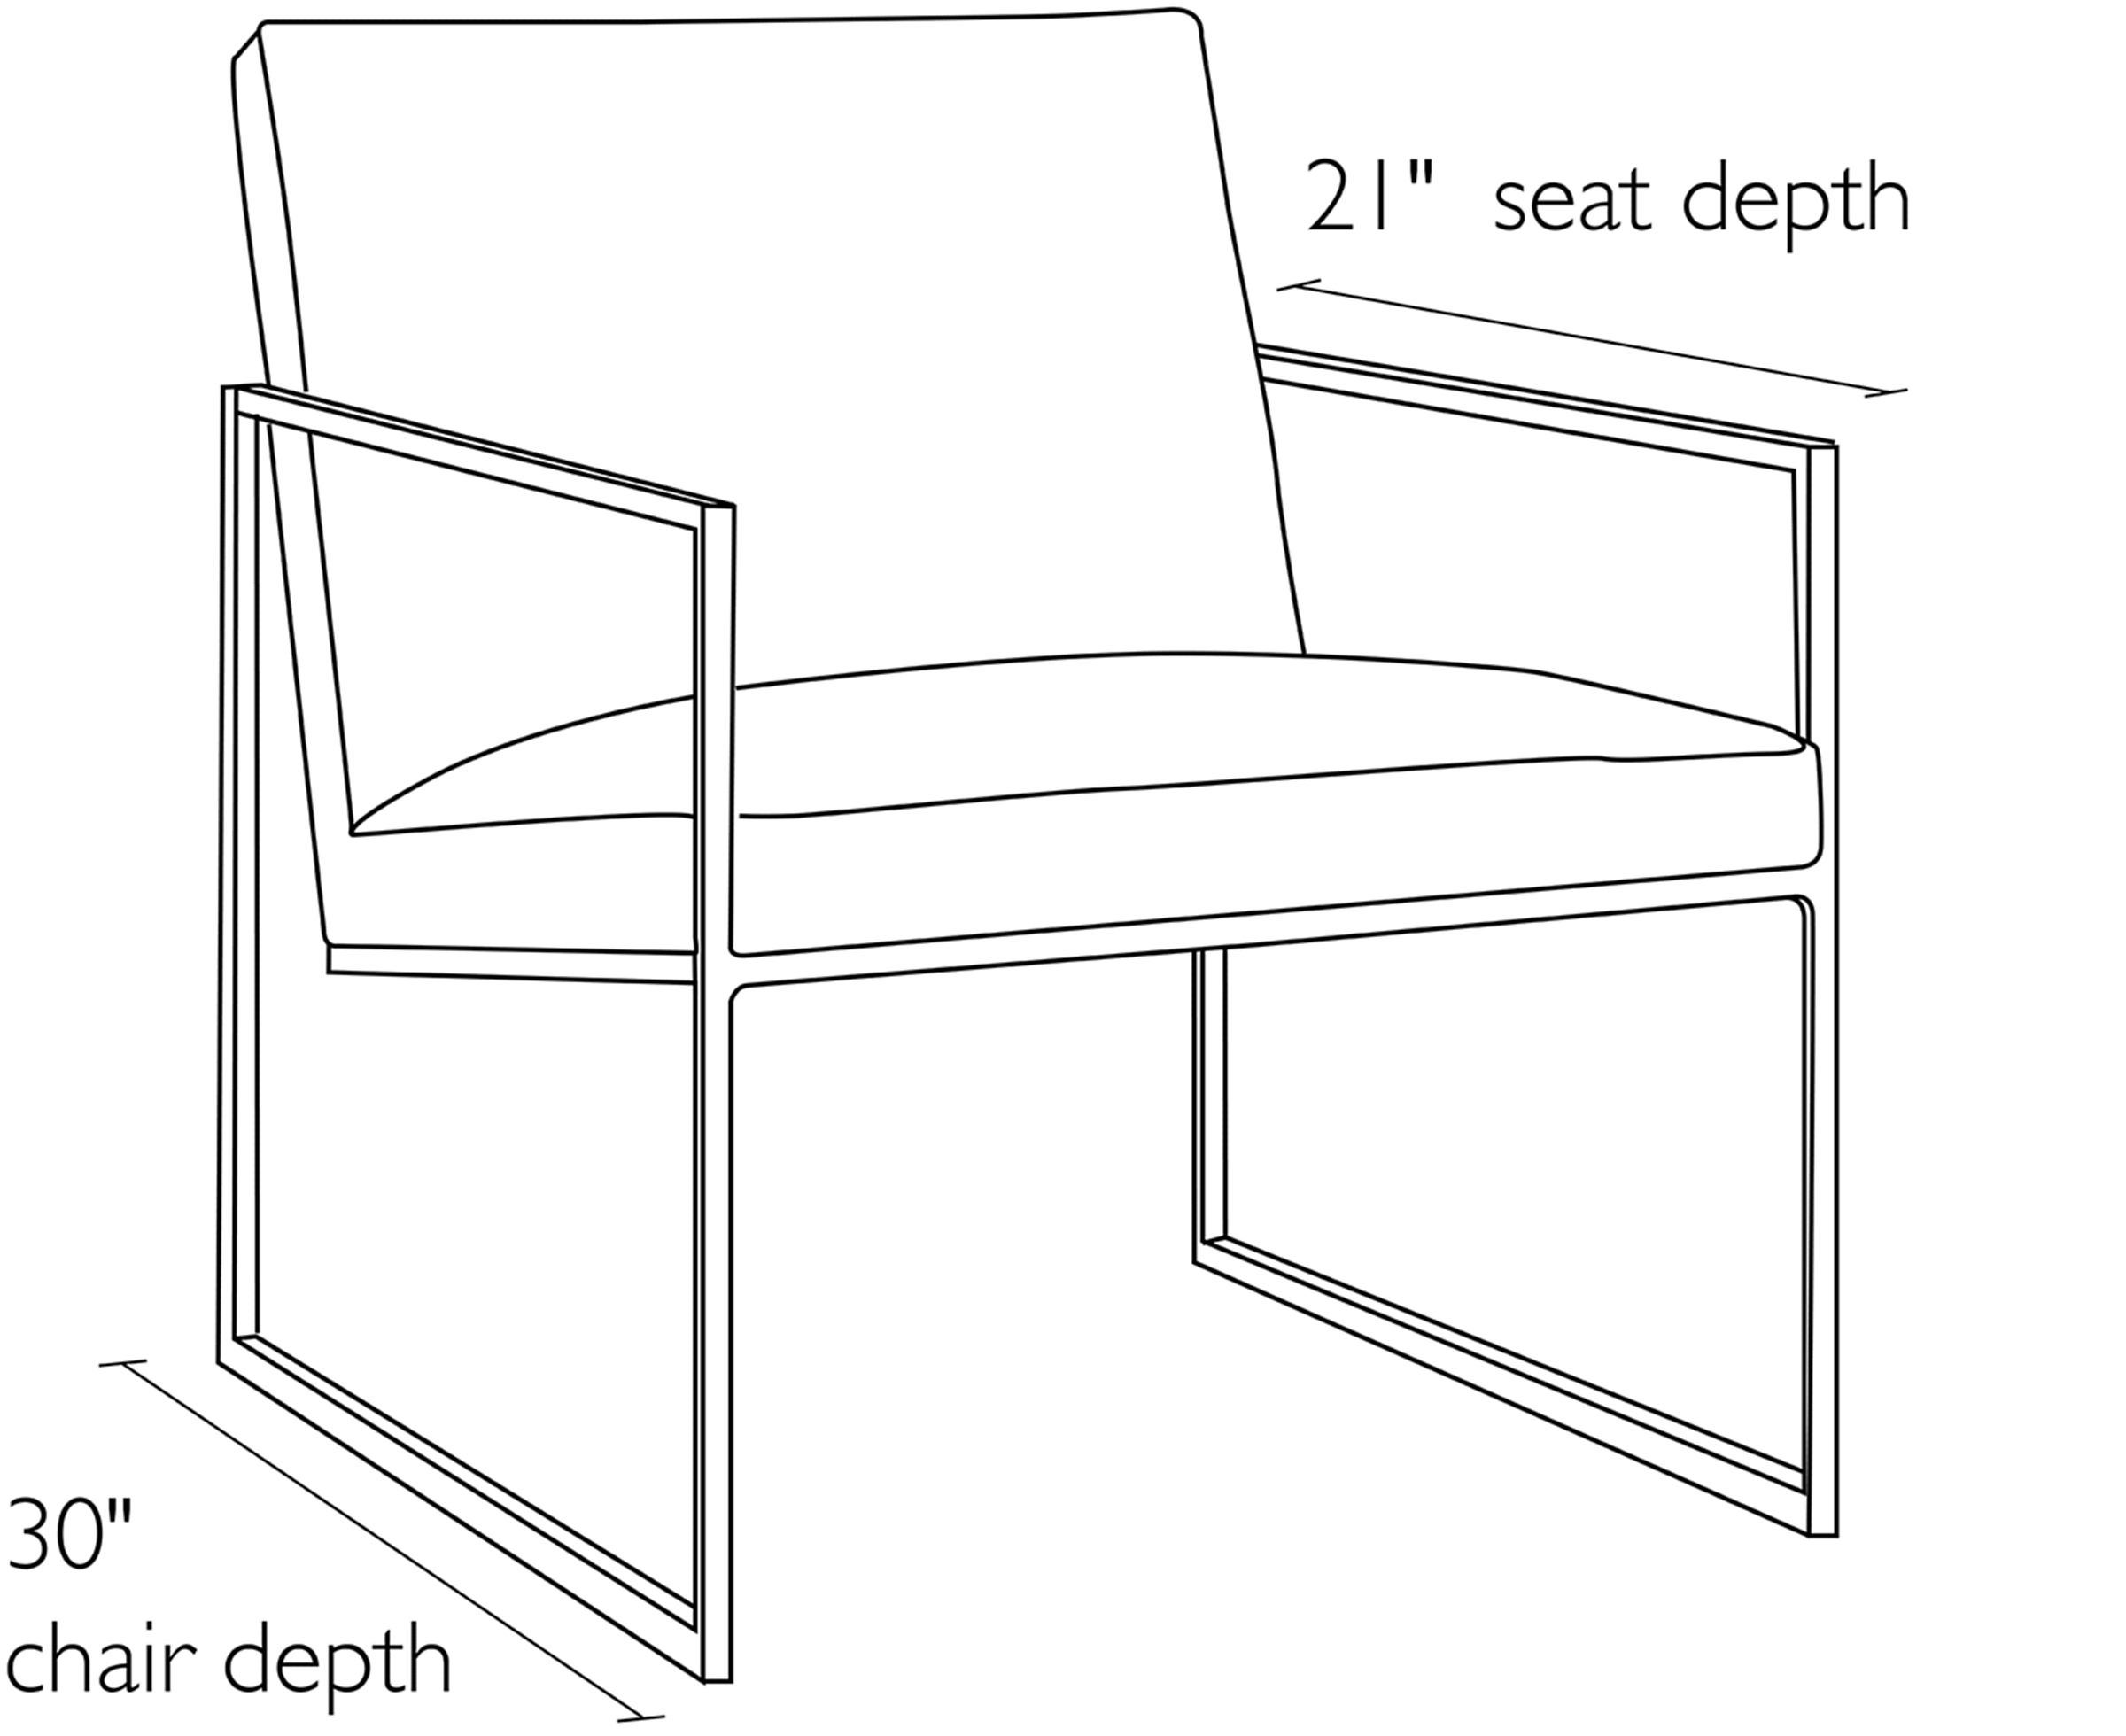 Side view dimension illustration of Novato chair.